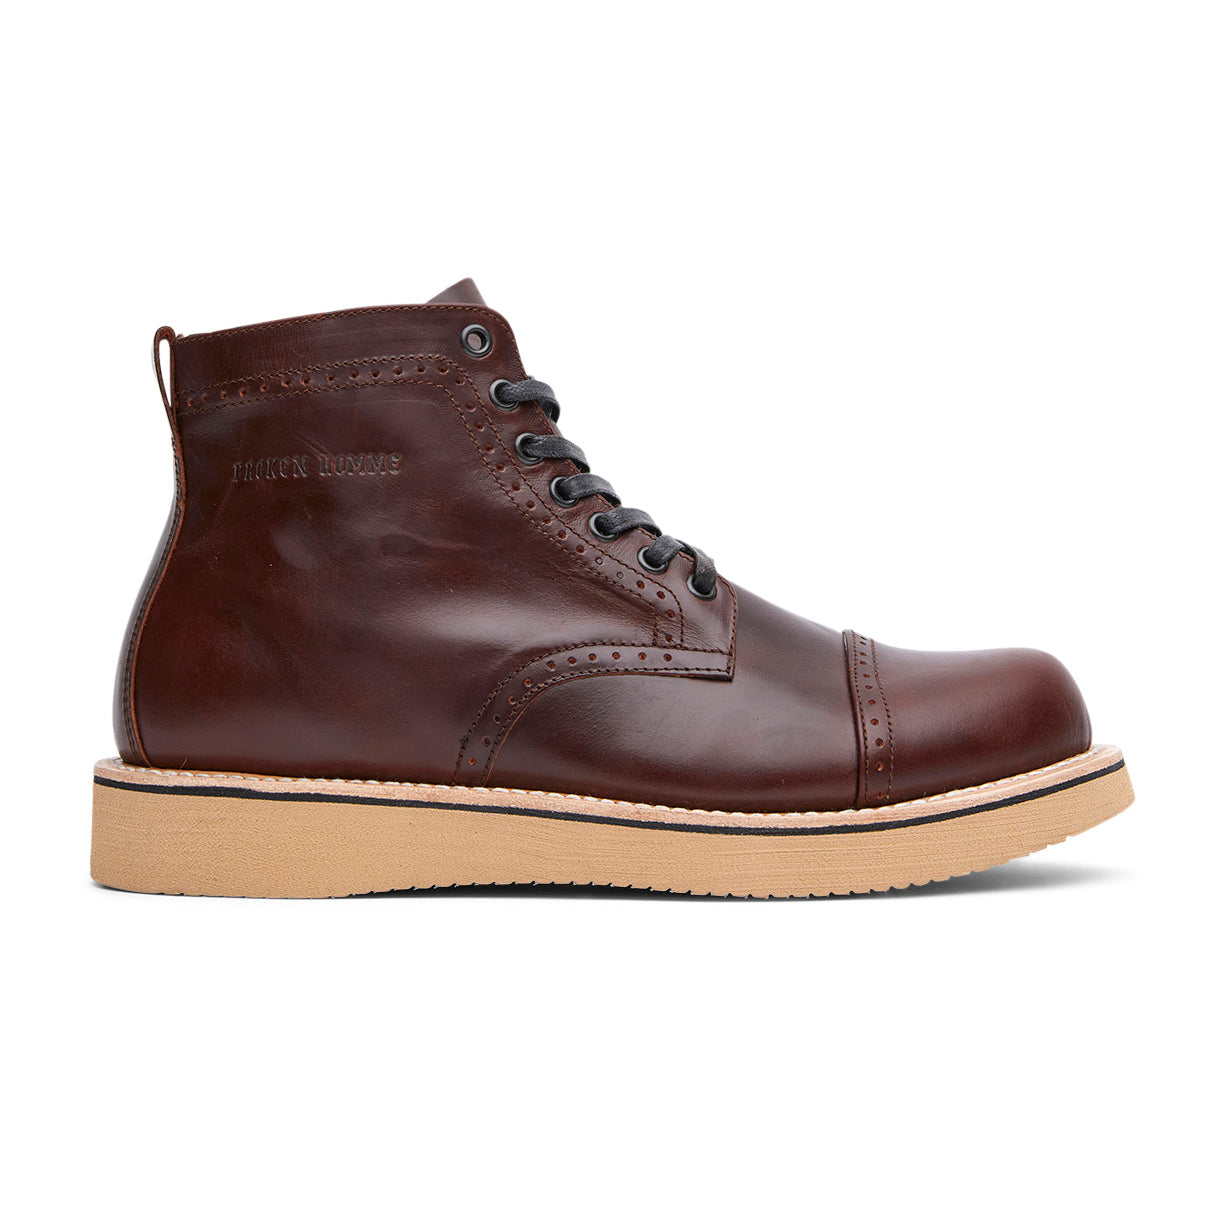 The Broken Homme Shaun boot is a stylish men's brown leather boot with a rubber sole.